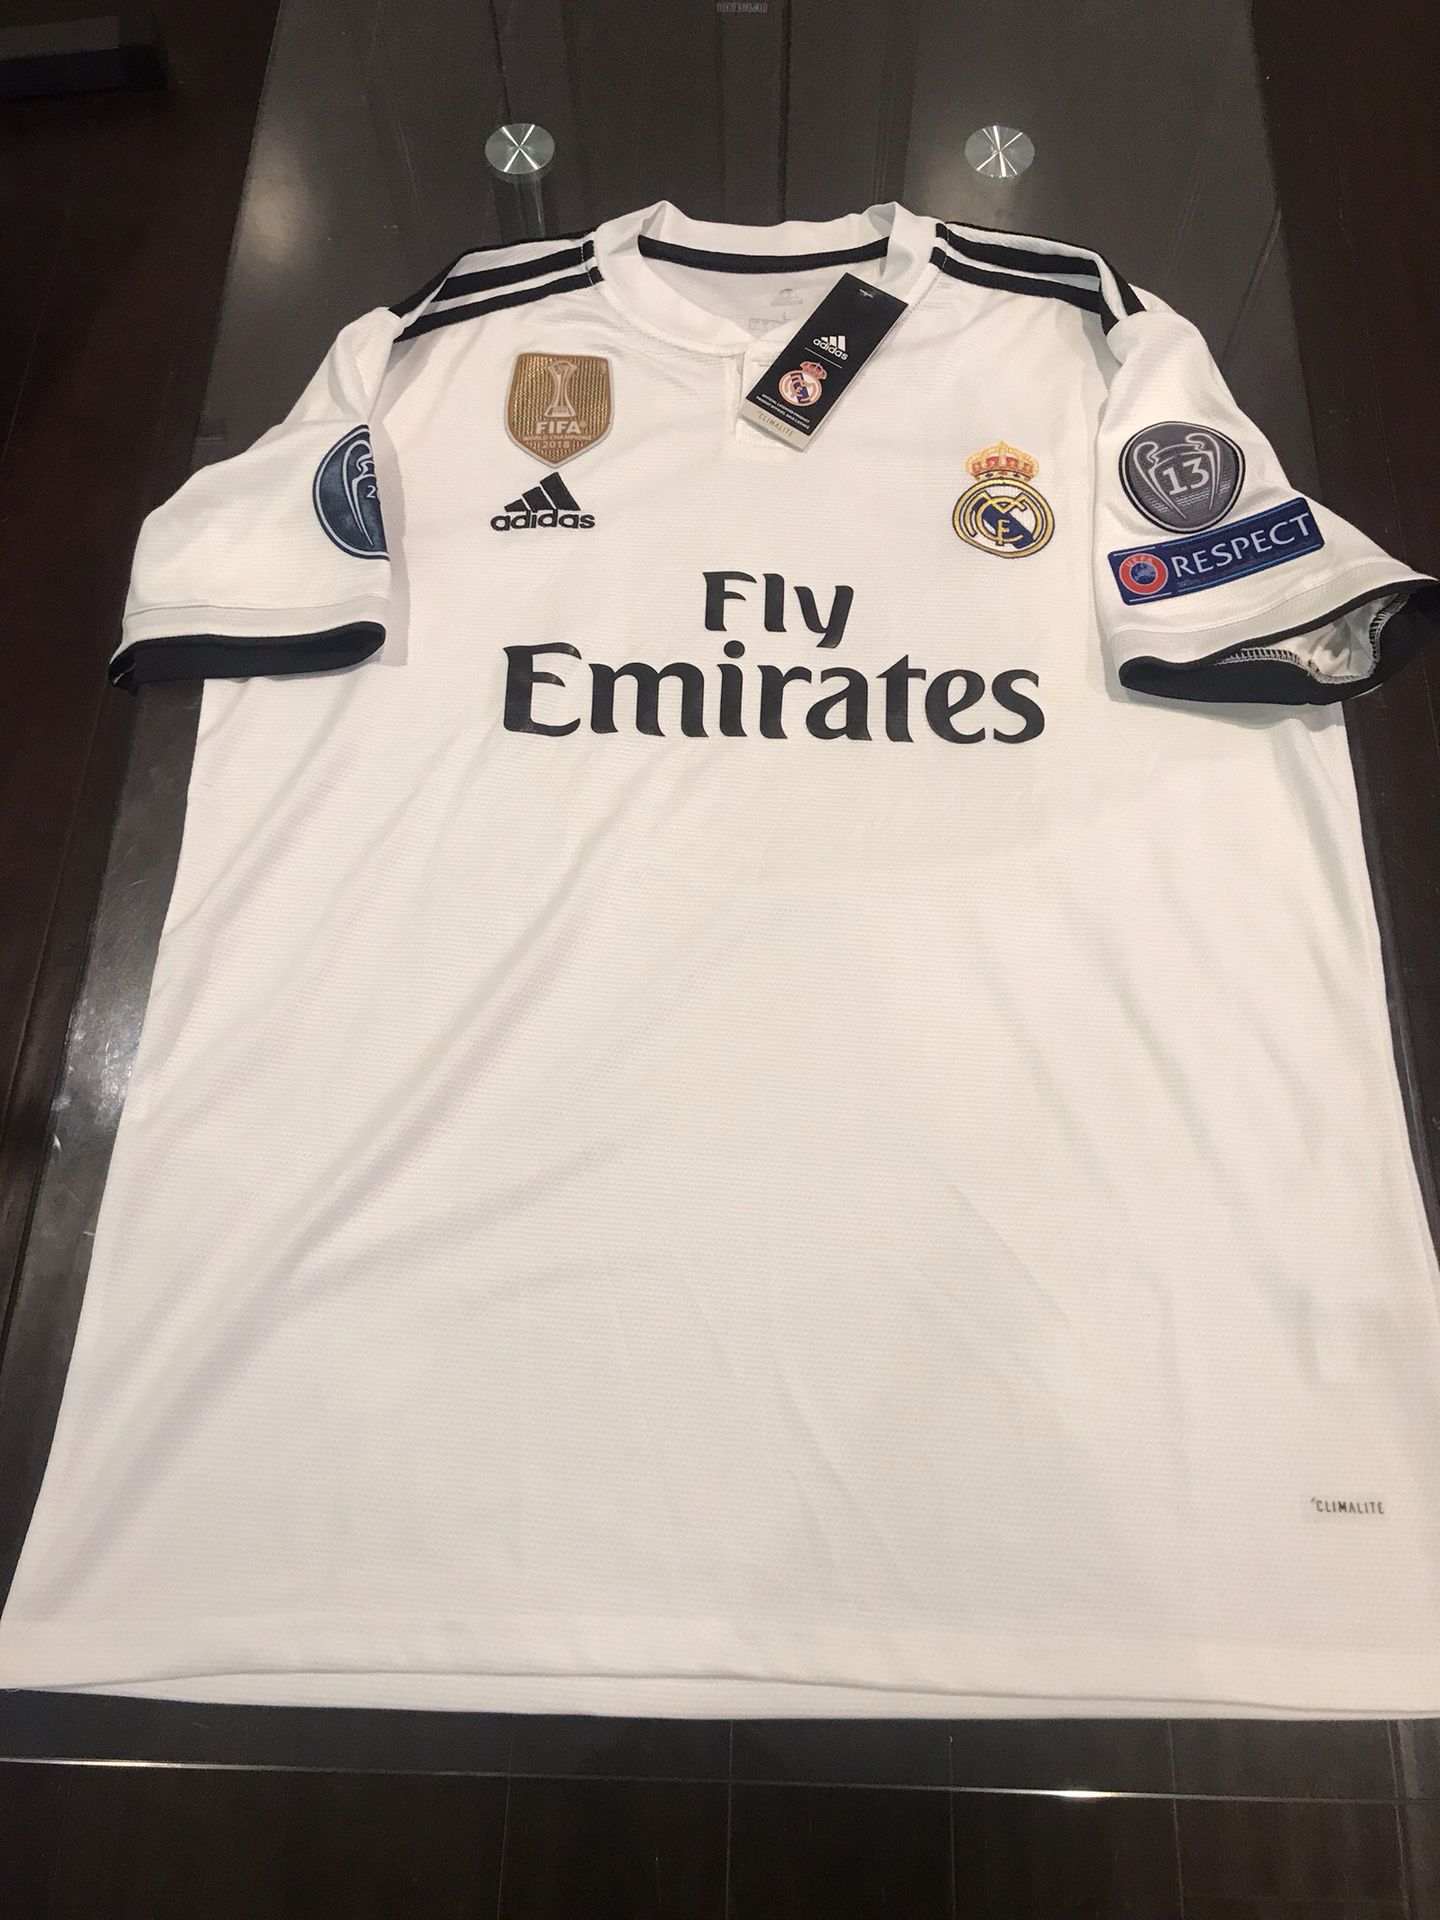 Real Madrid Marcelo home and away both